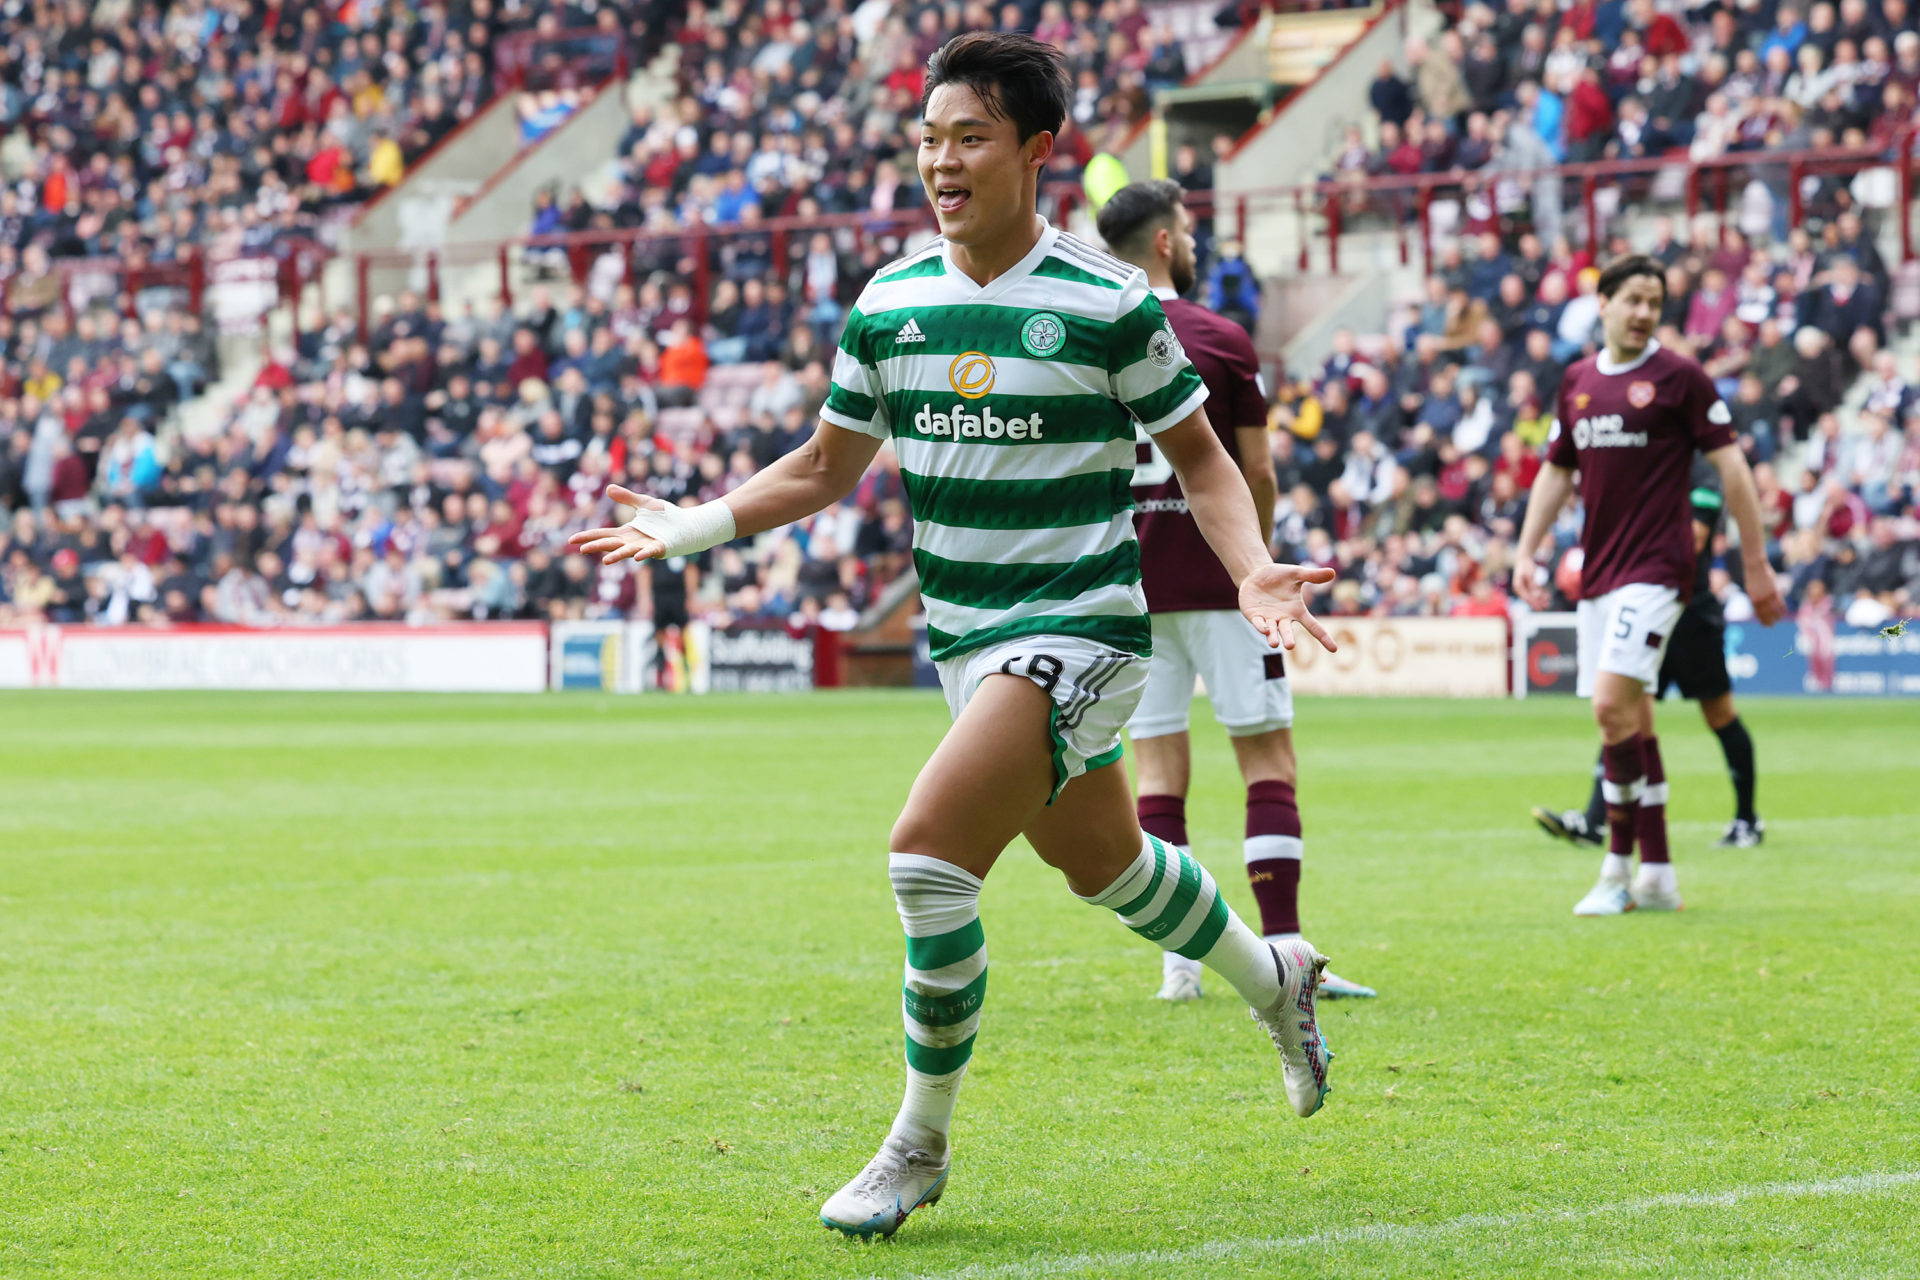 Hyeongyu Oh thanks the Celtic fans on Instagram after Tynecastle title win